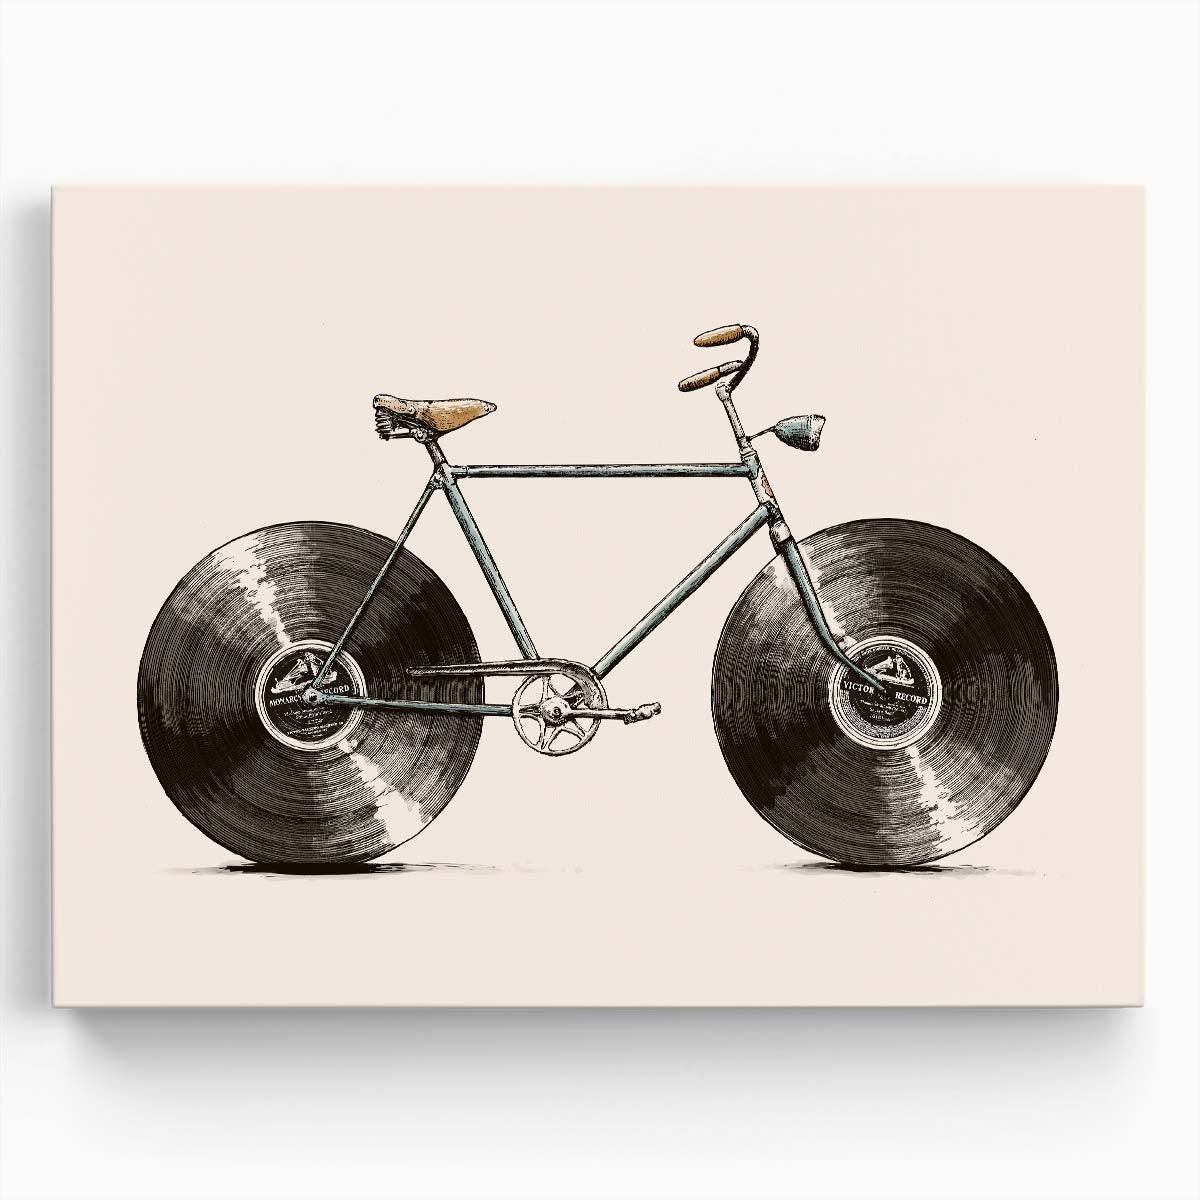 Velophone Bicycle Art Sporty Bike Illustration on White Wall Art by Luxuriance Designs. Made in USA.